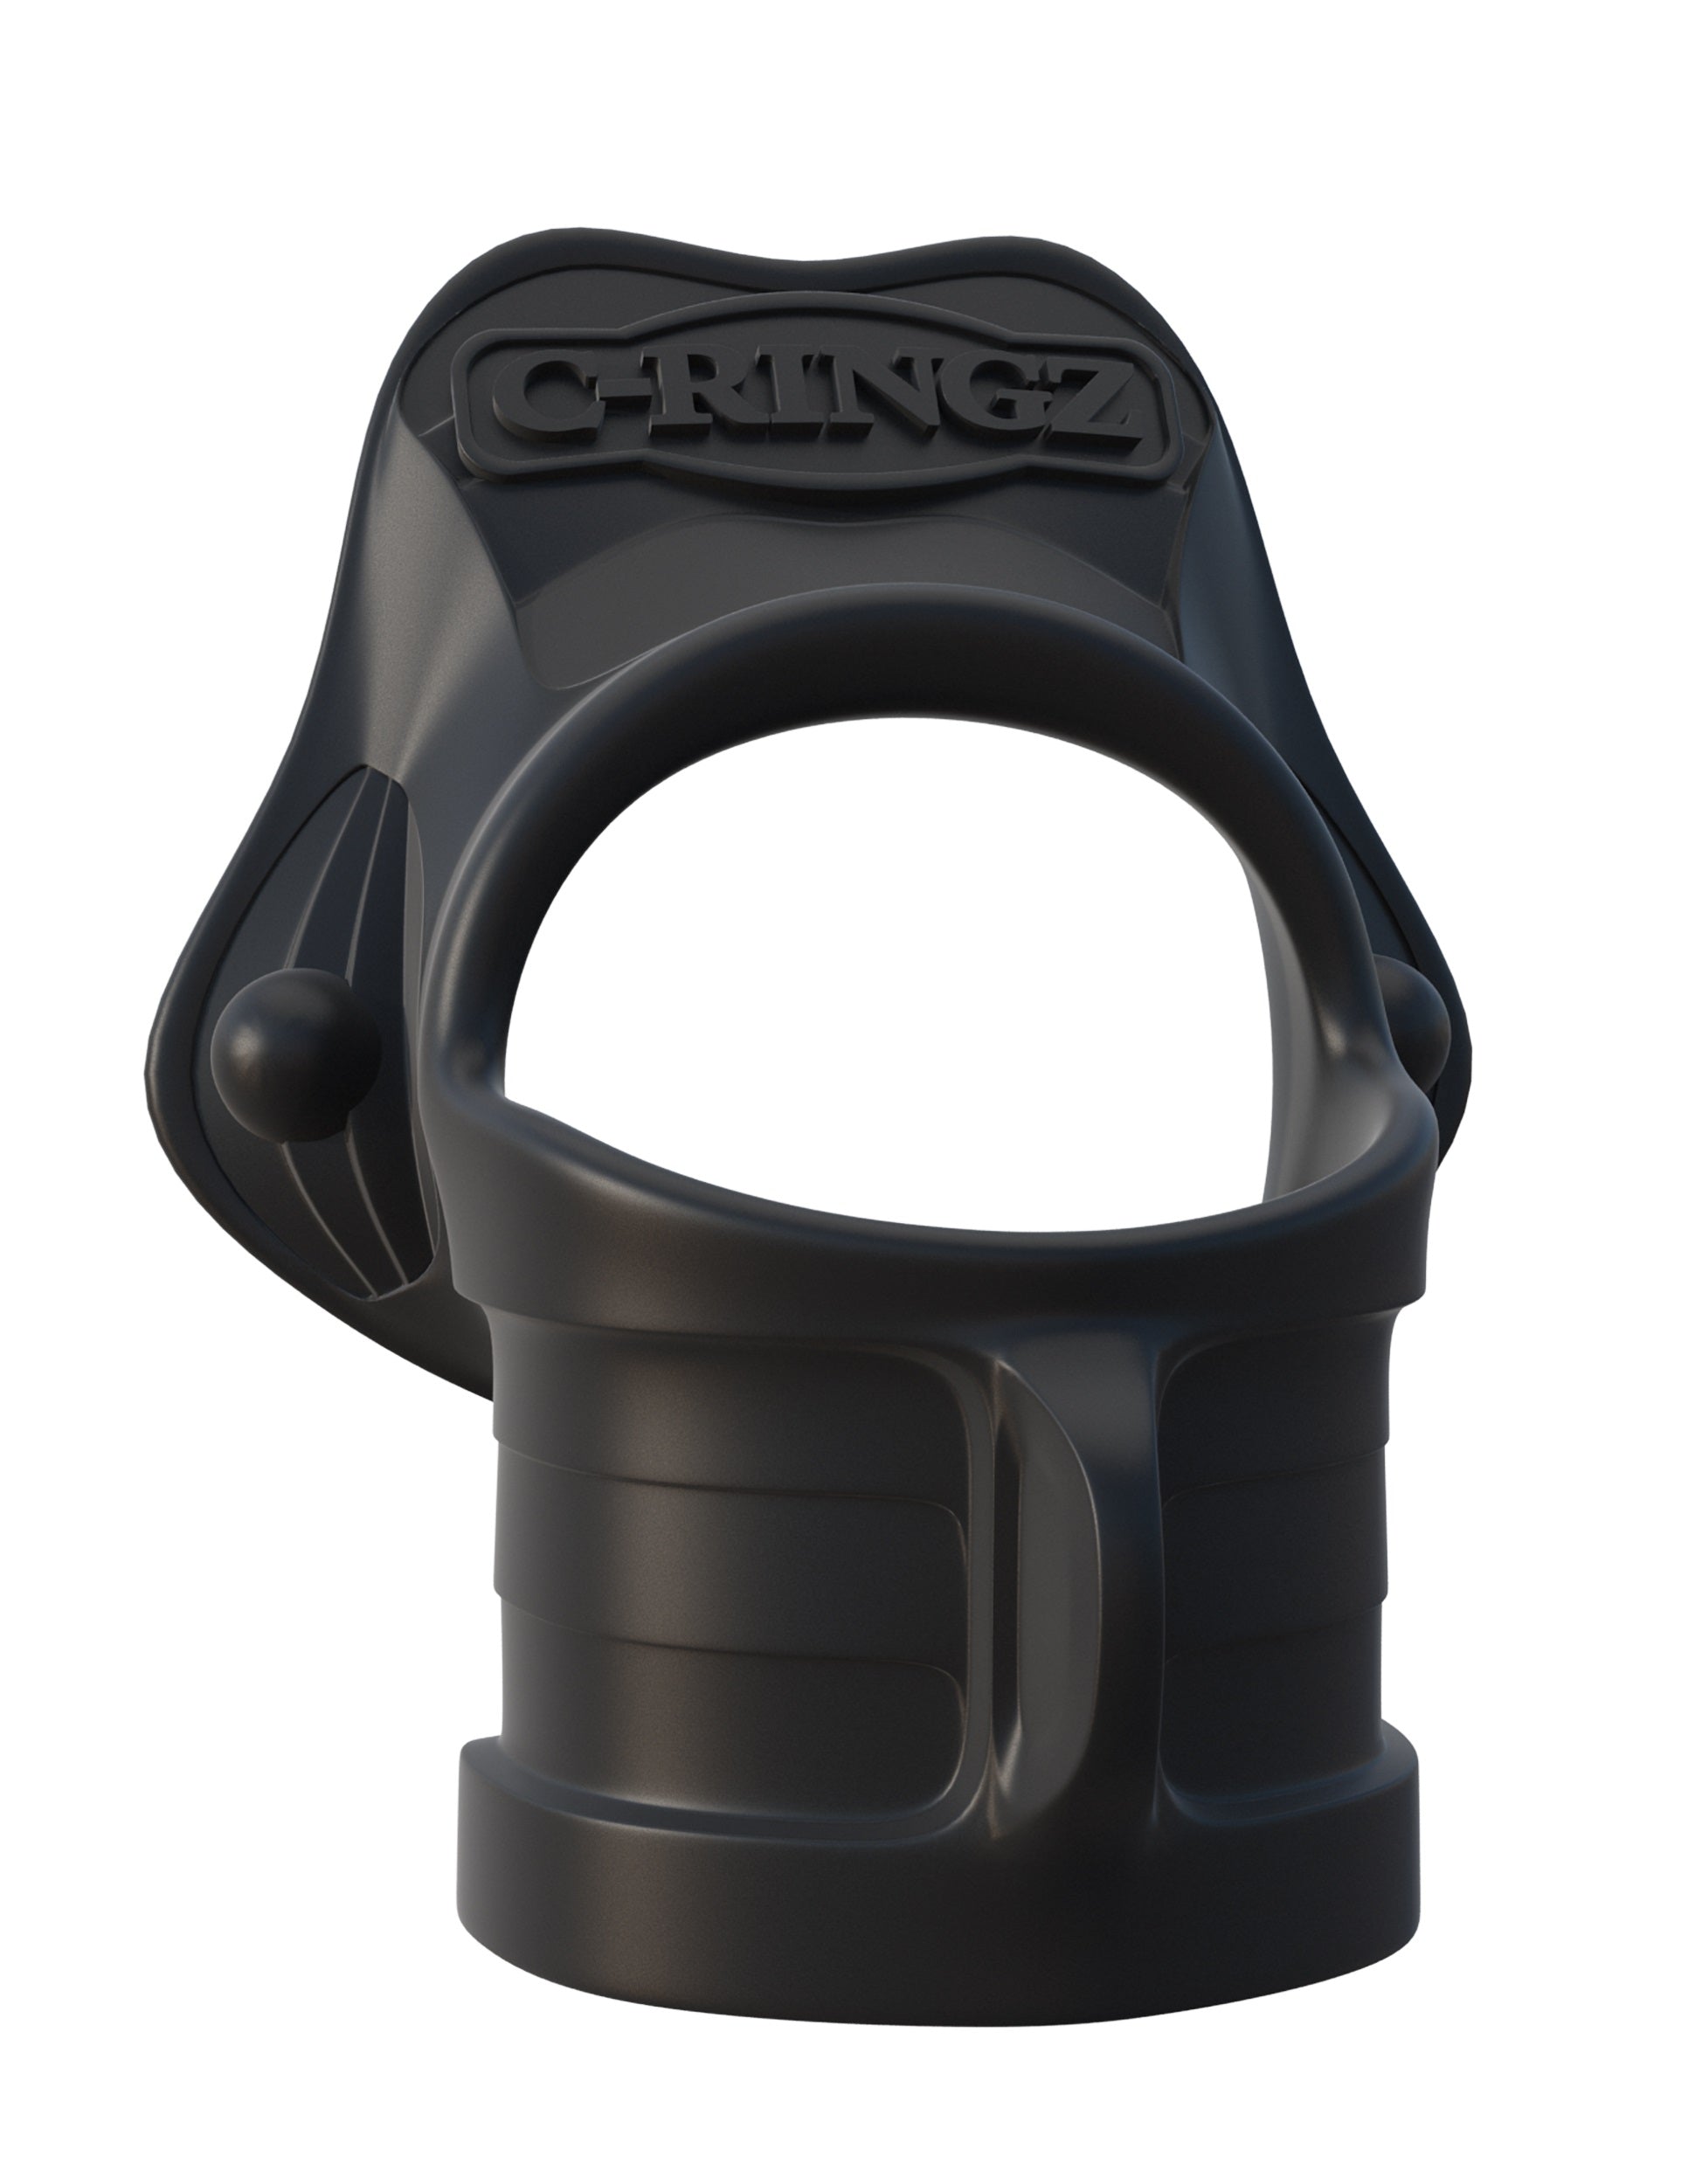 Fantasy C-Ringz Rock Hard Ring and Ball-Stretcher - Black PD5904-23